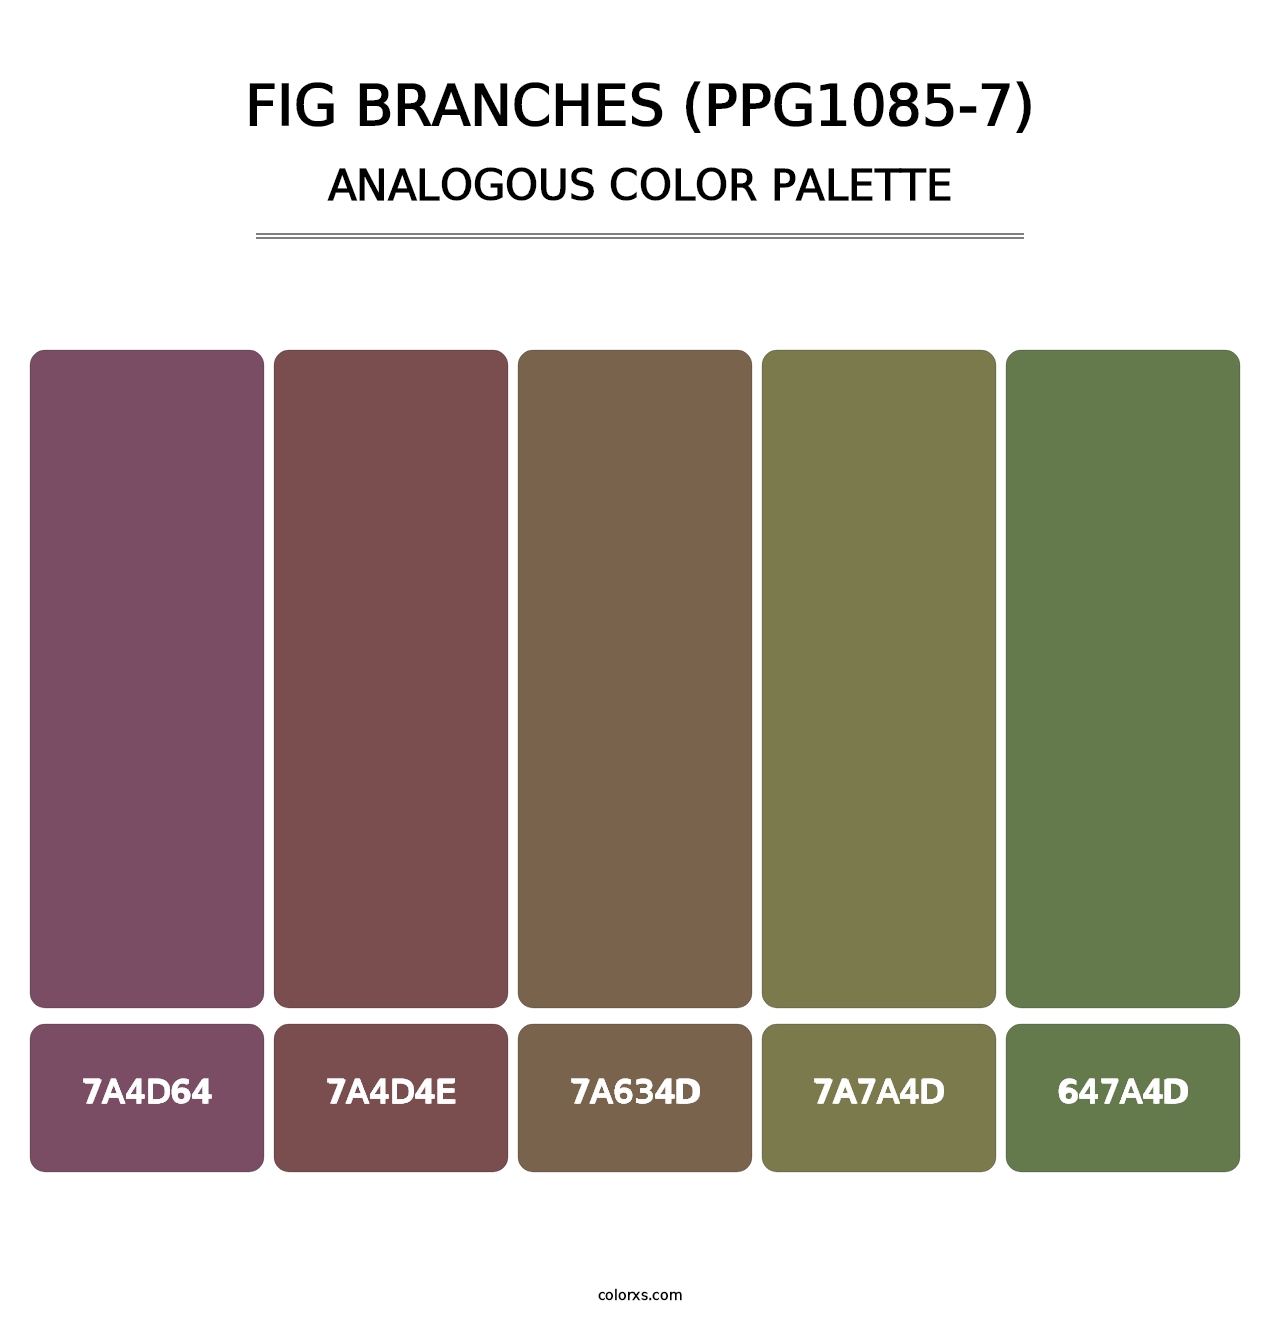 Fig Branches (PPG1085-7) - Analogous Color Palette